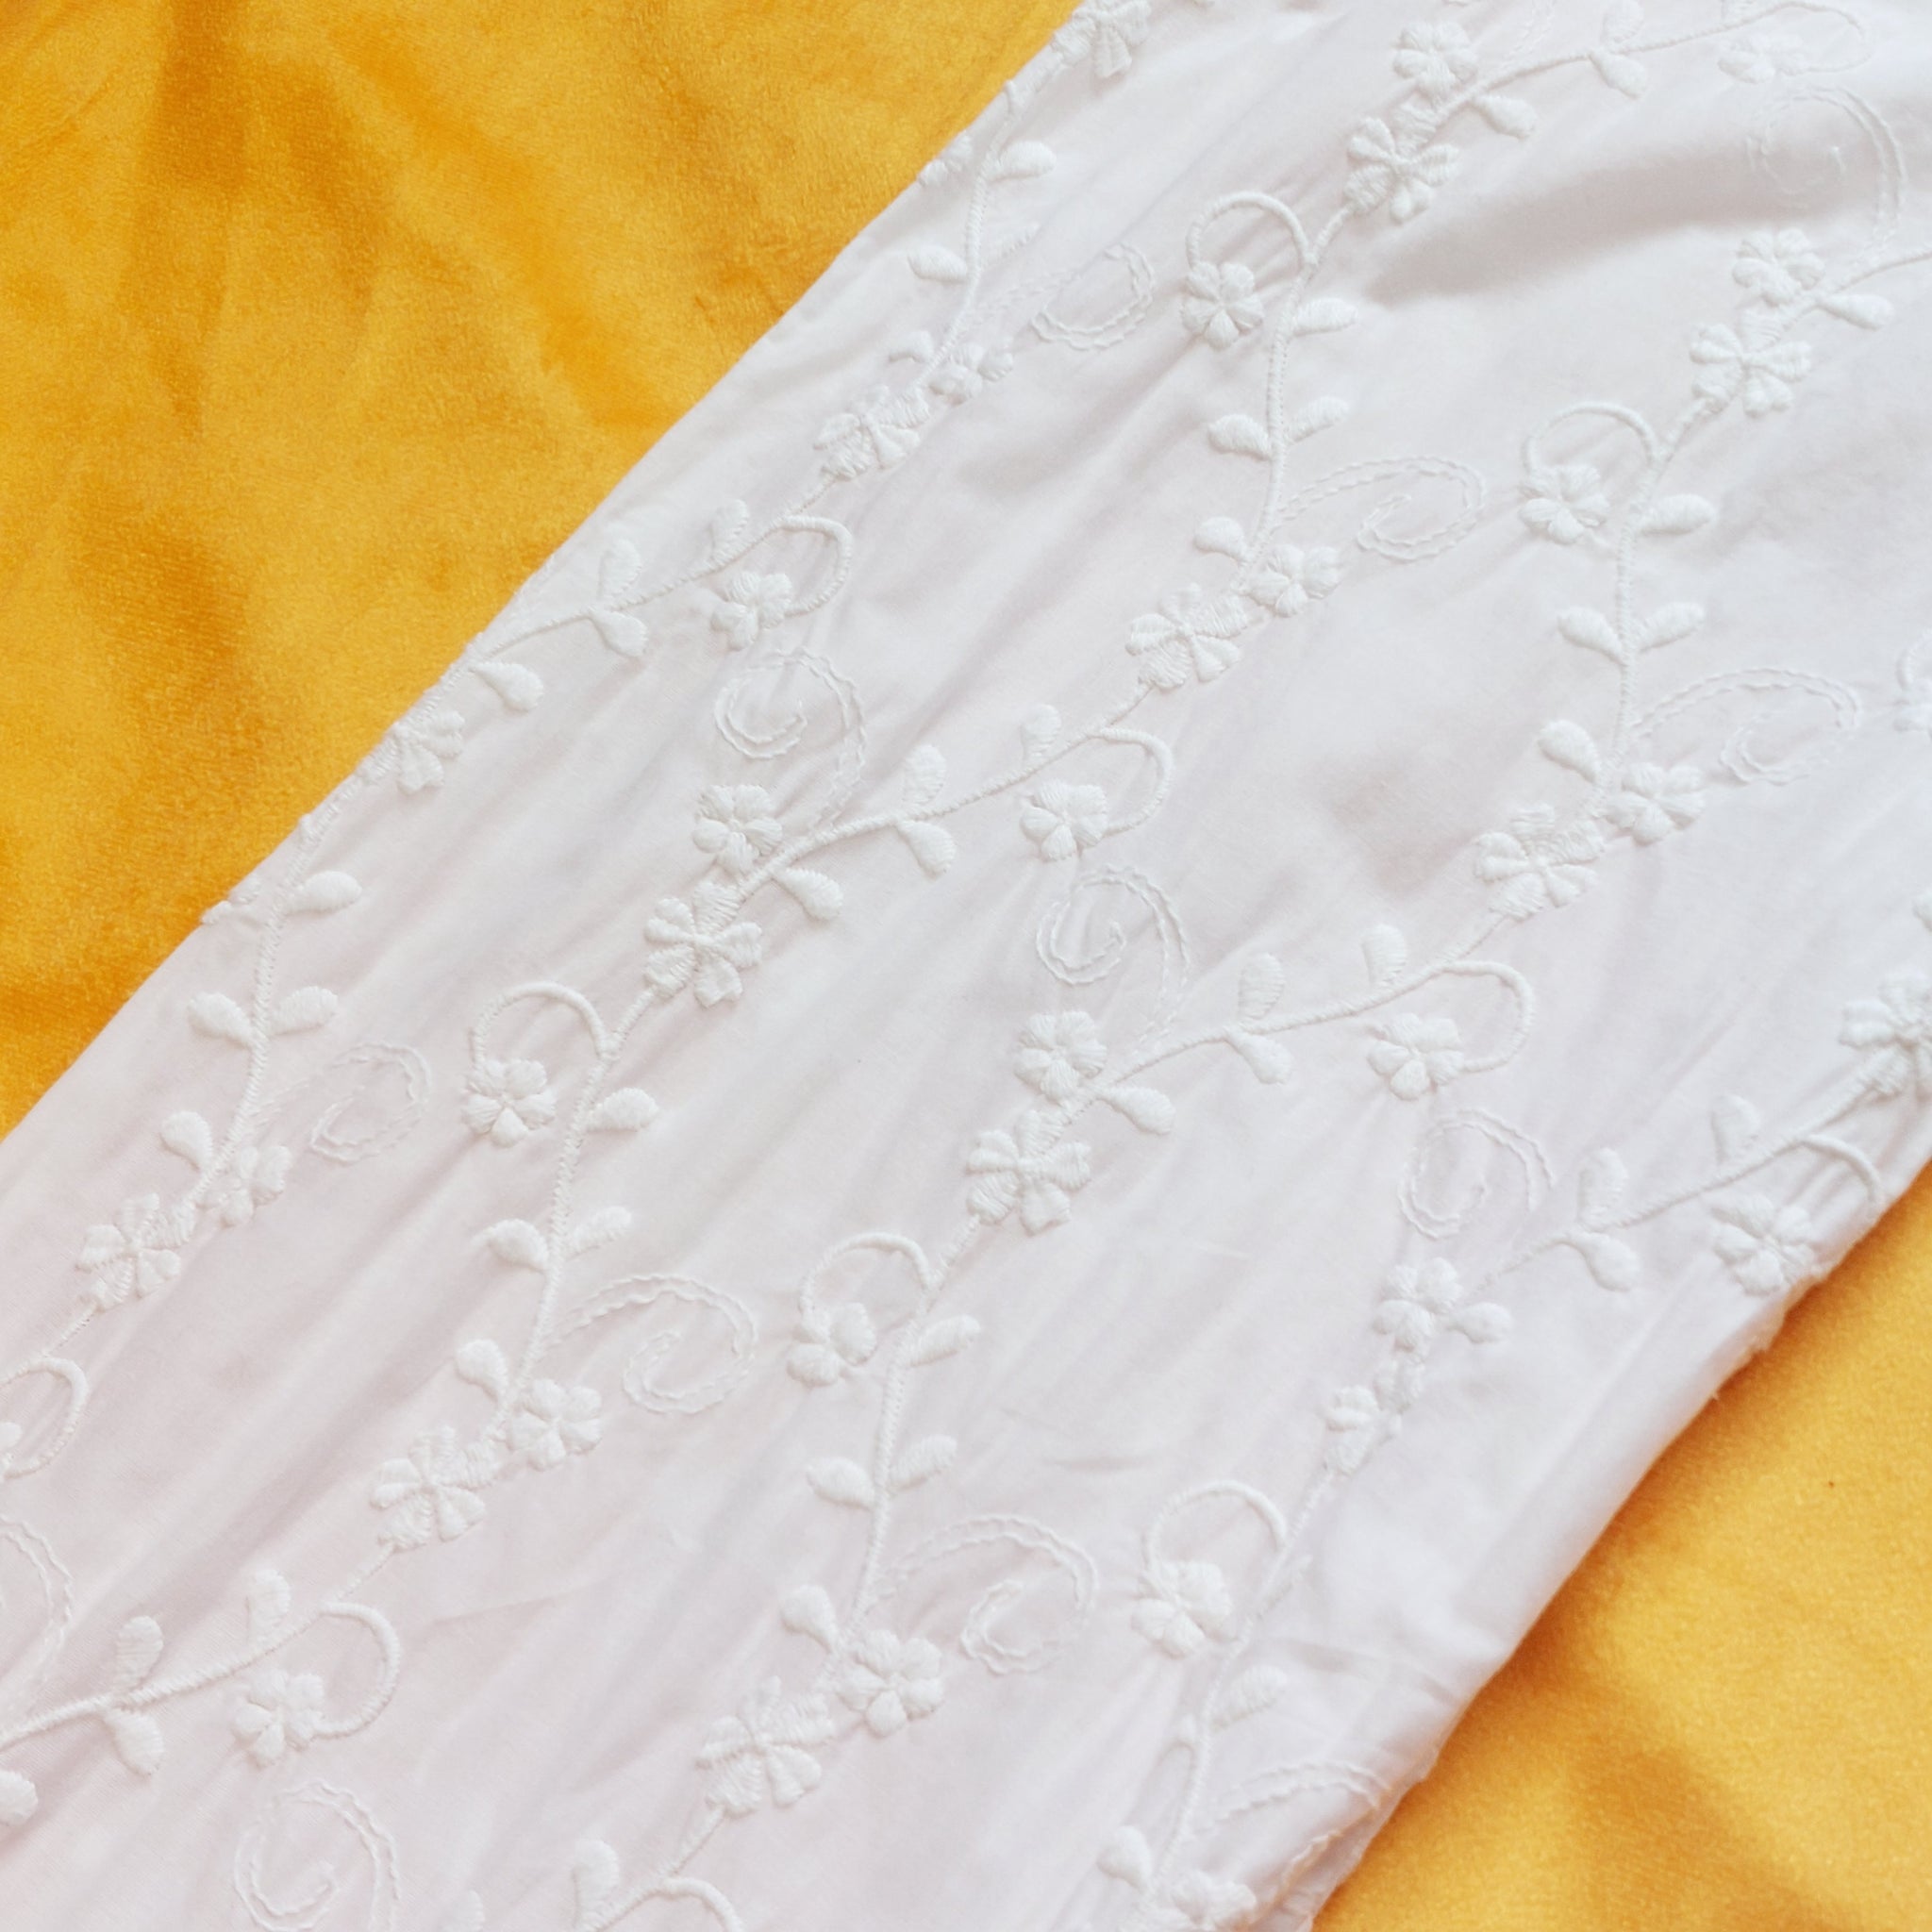 BOHEMIAN WHITE EMBROIDERED PANTS - M